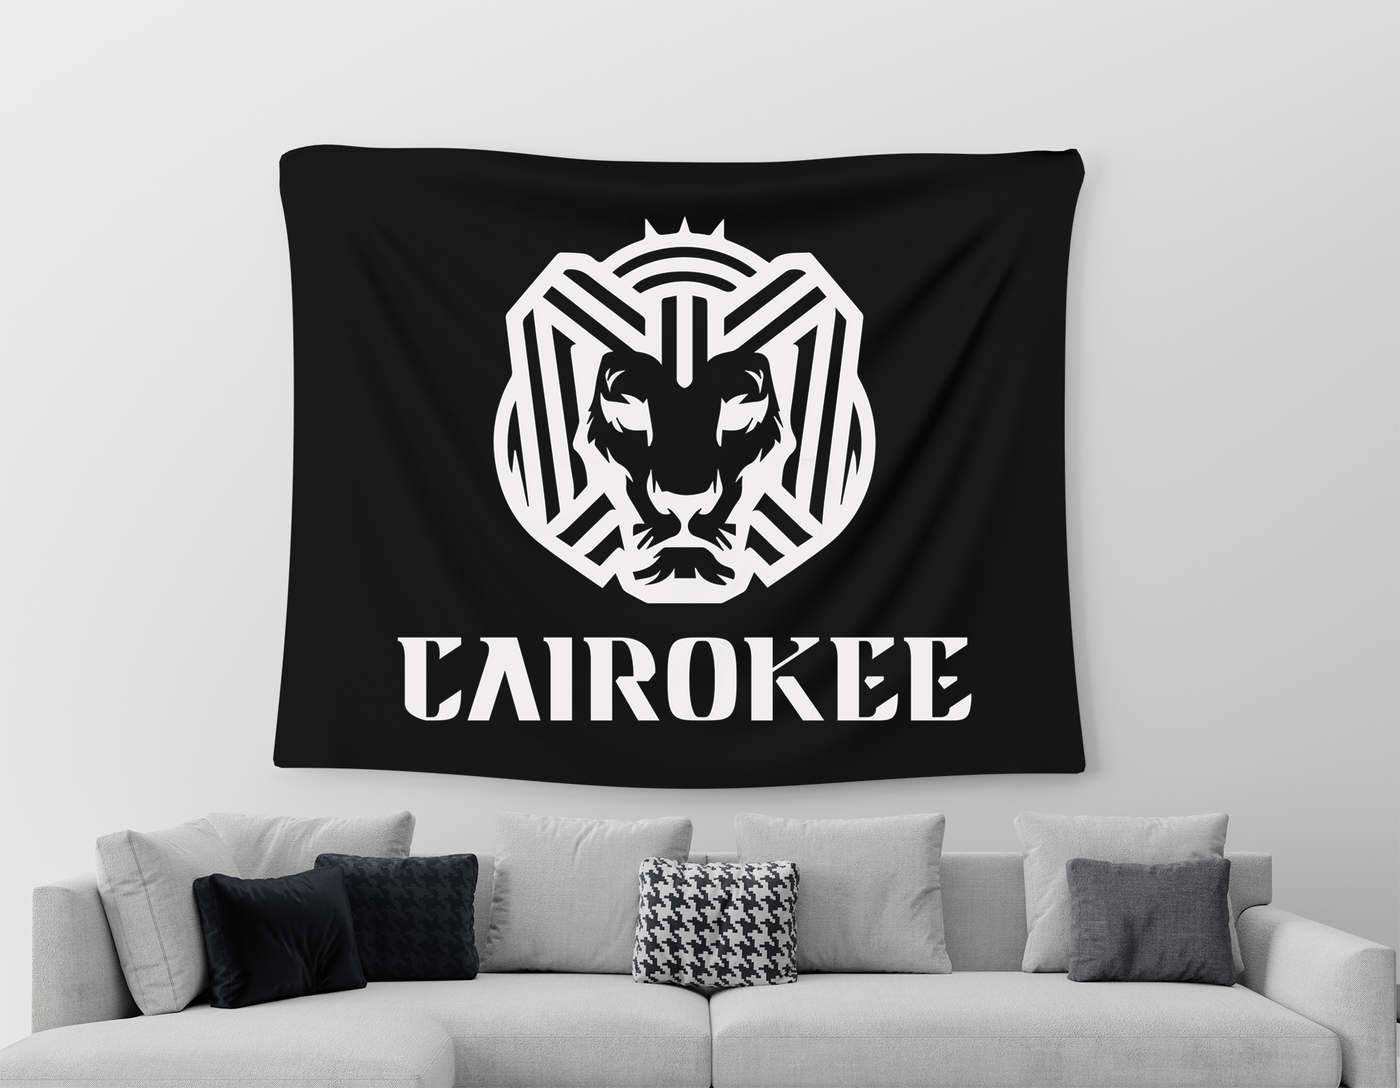 Cairokee wall Tapestries